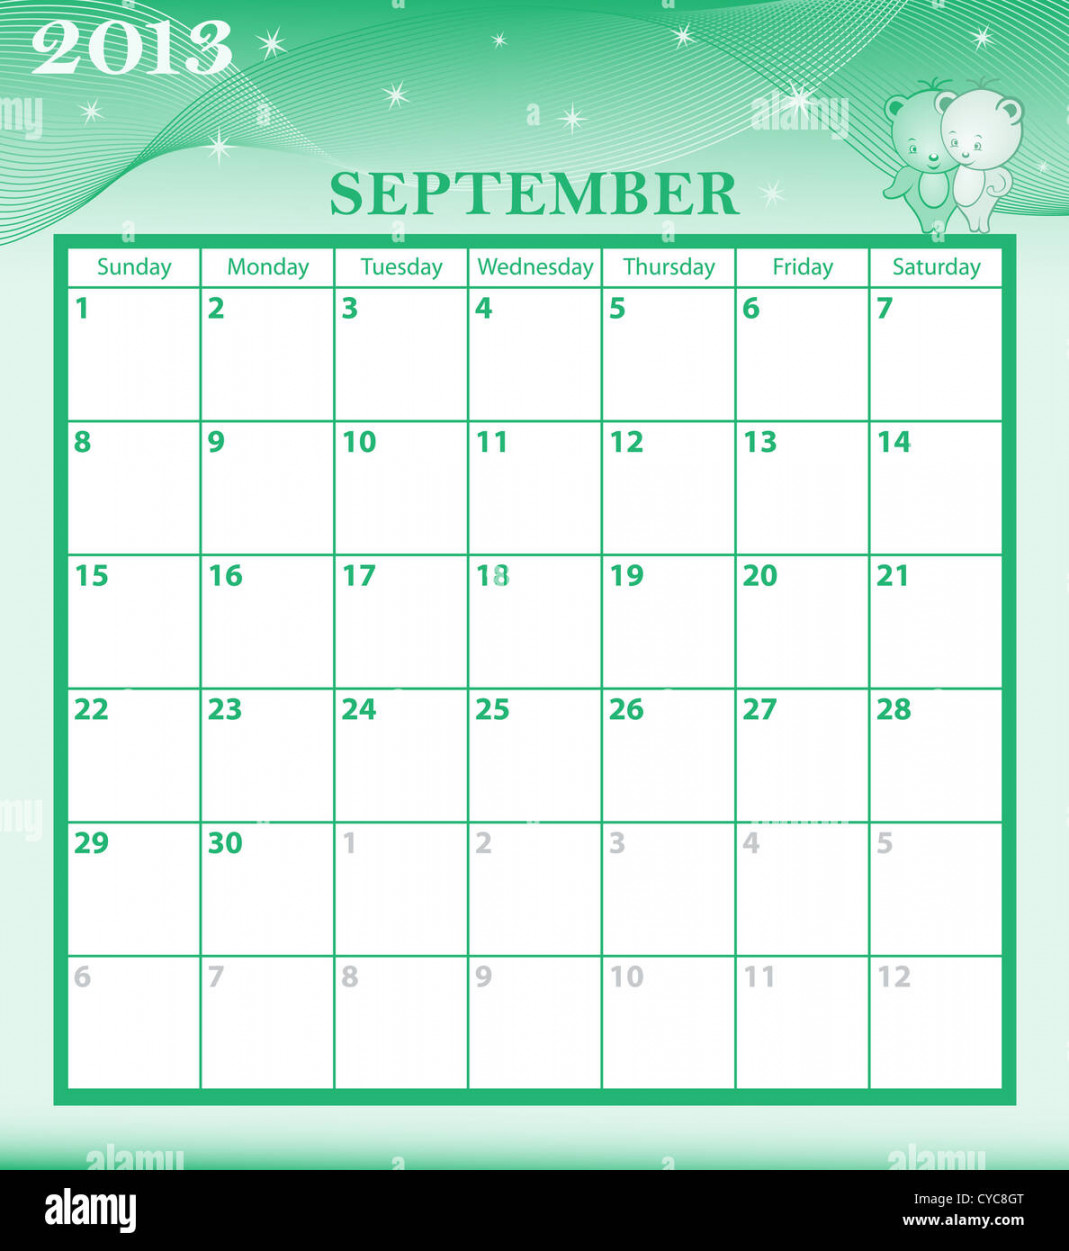 Calendar September month with large date boxes